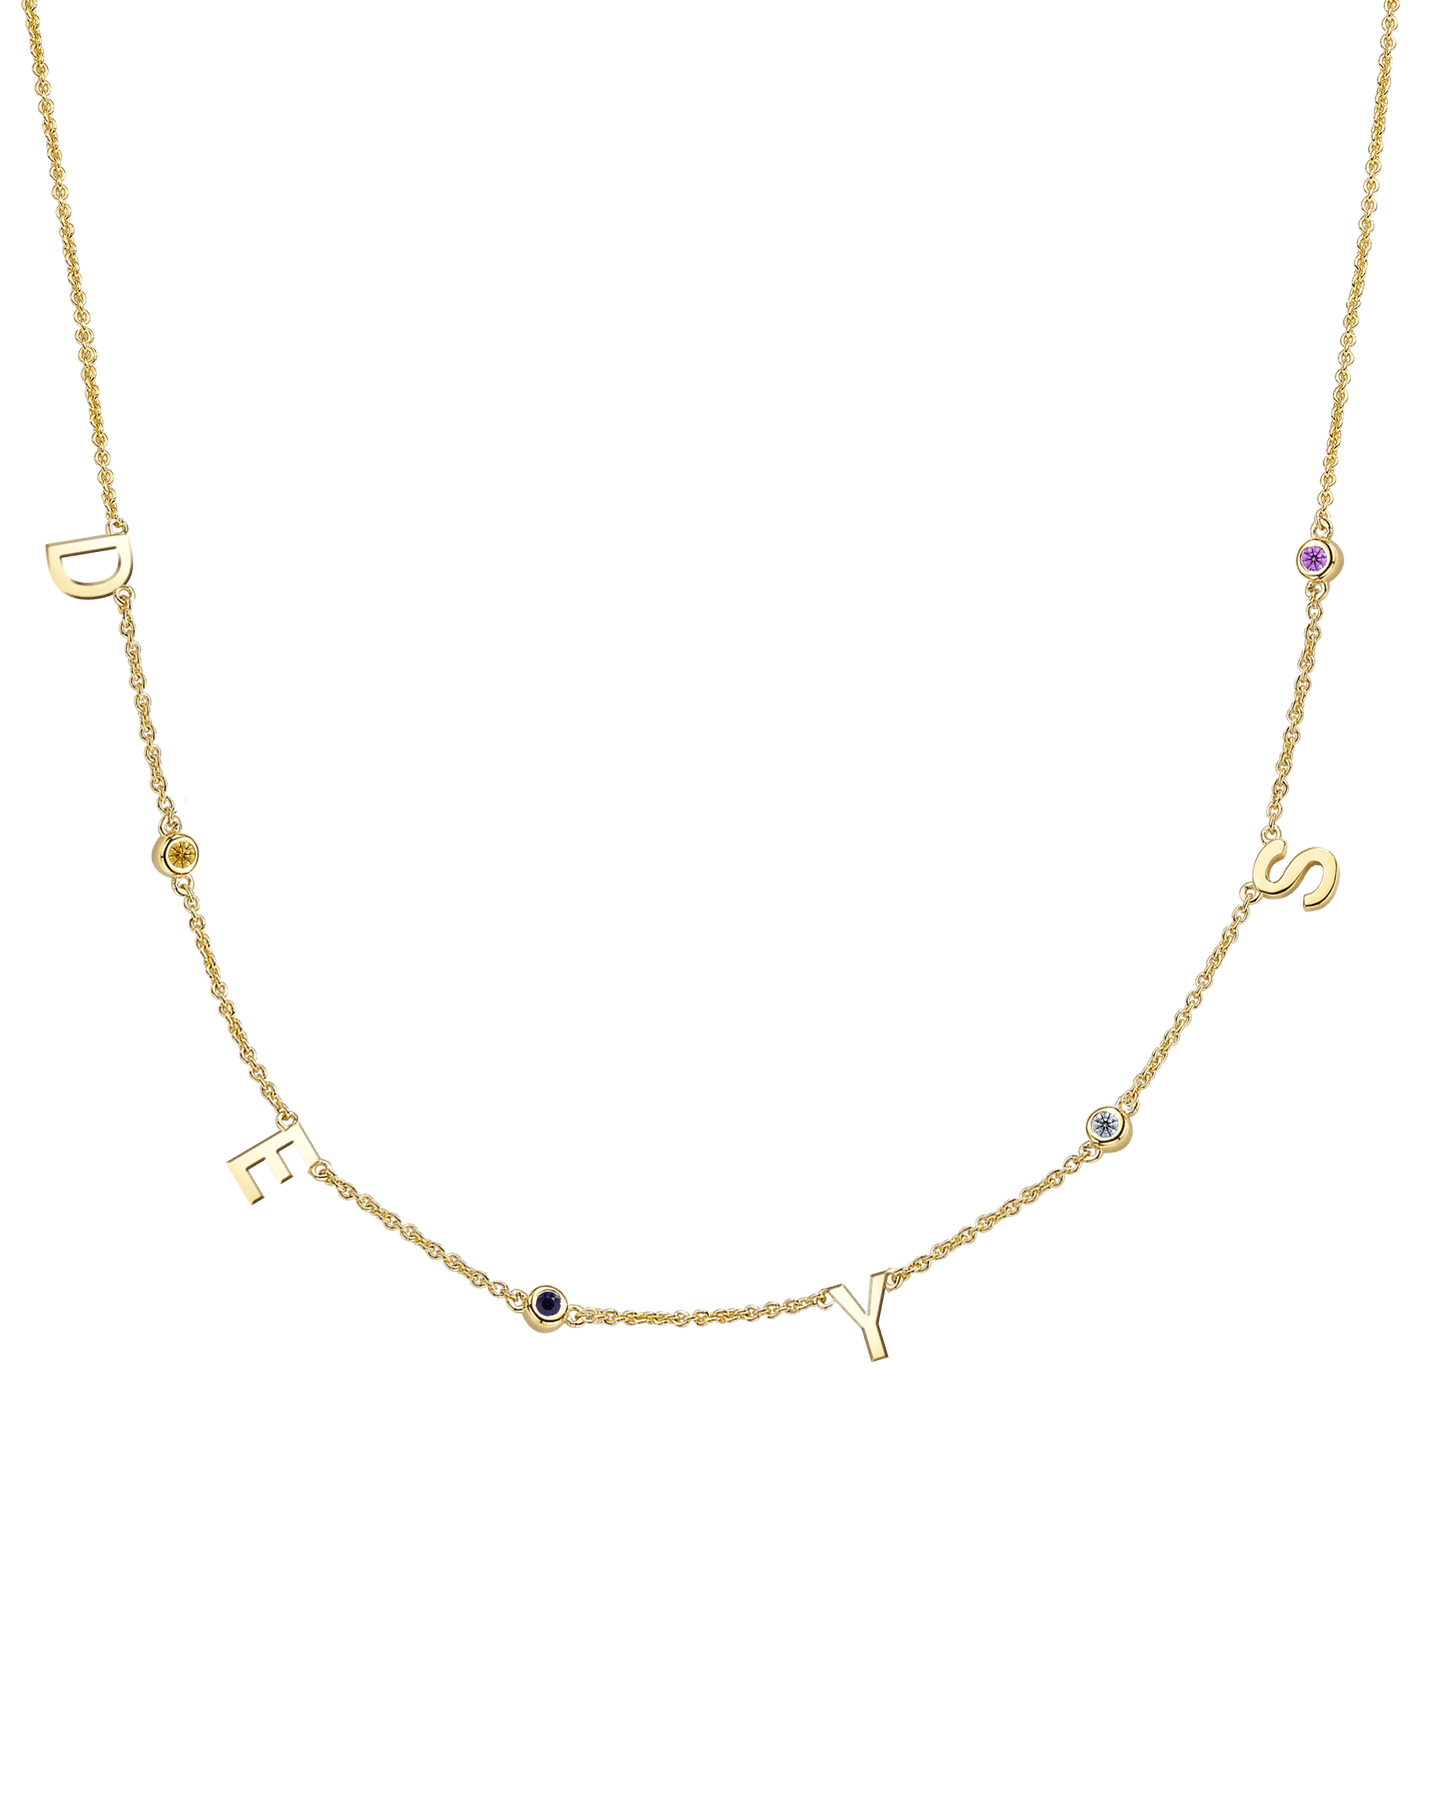 Initial Birthstone Necklace - 14K Yellow Gold Necklaces magal-dev 4 Initials + 4 Birthstones Adjustable 16-17" (40cm-43cm) 